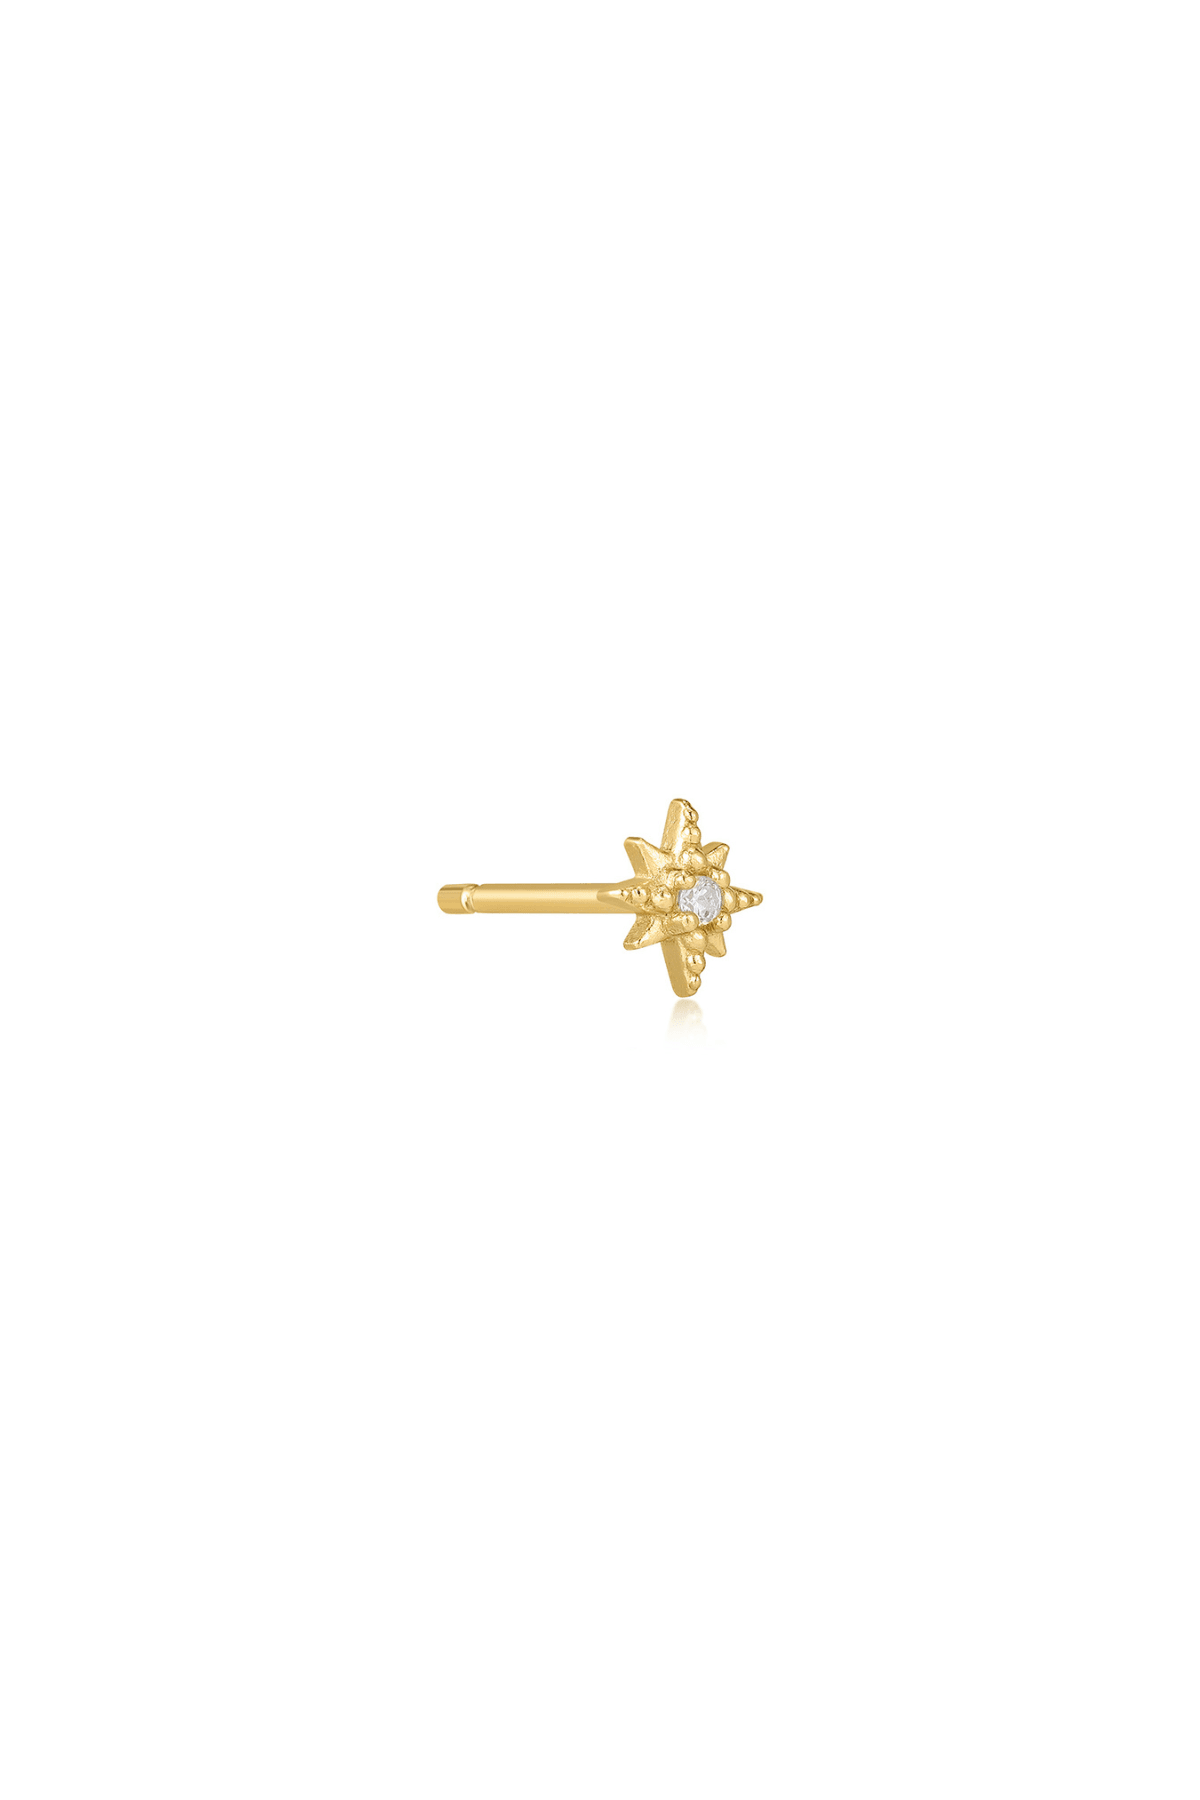 The Wishing Star 14ct Gold Vermeil Stud Earring (Single) - Molten Store